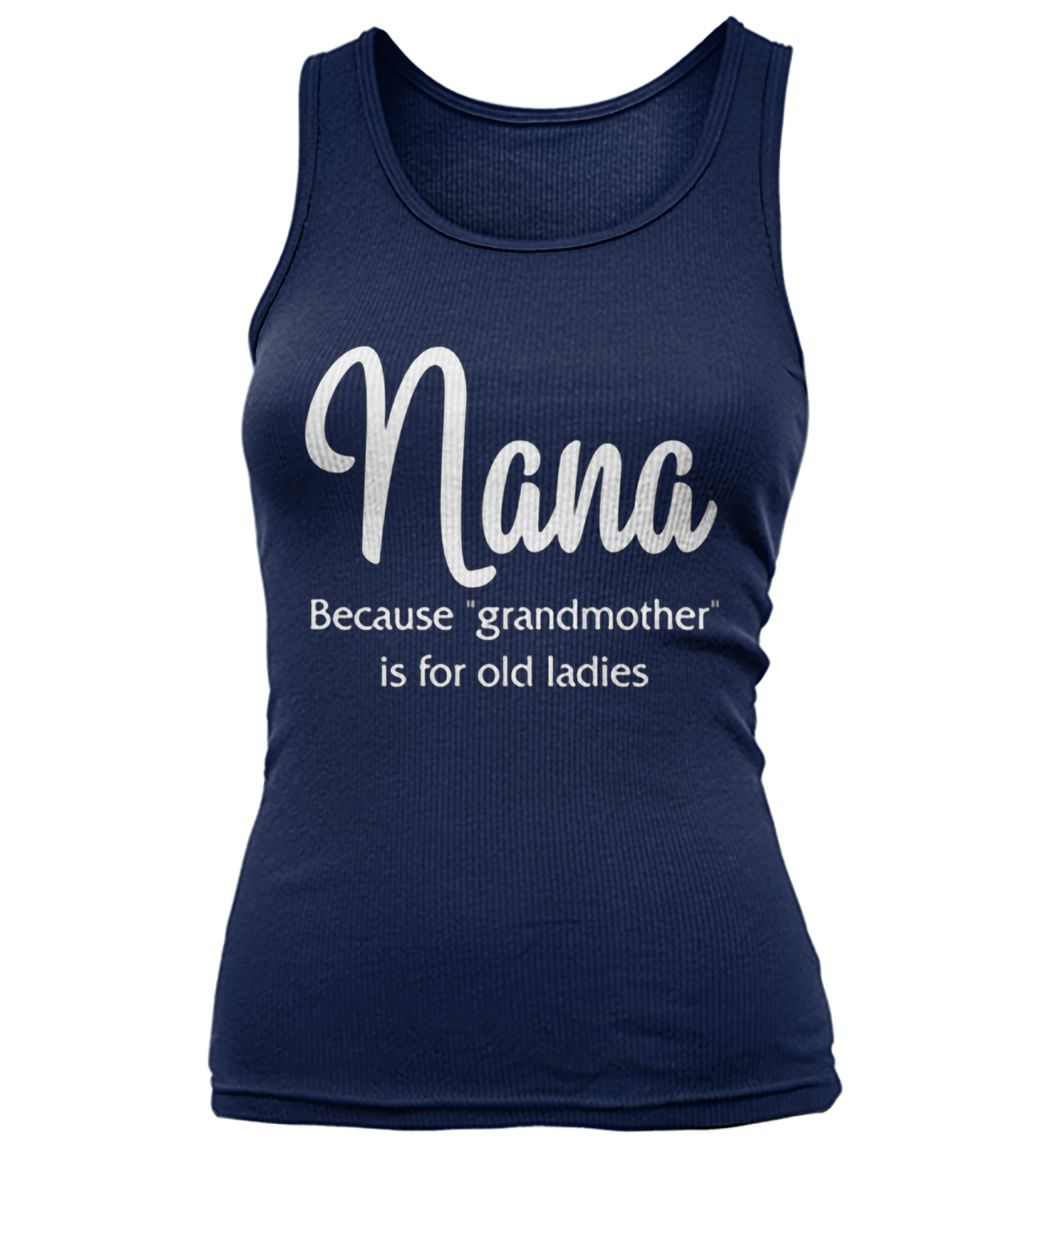 Nana because grandmother for old ladies women's tank top